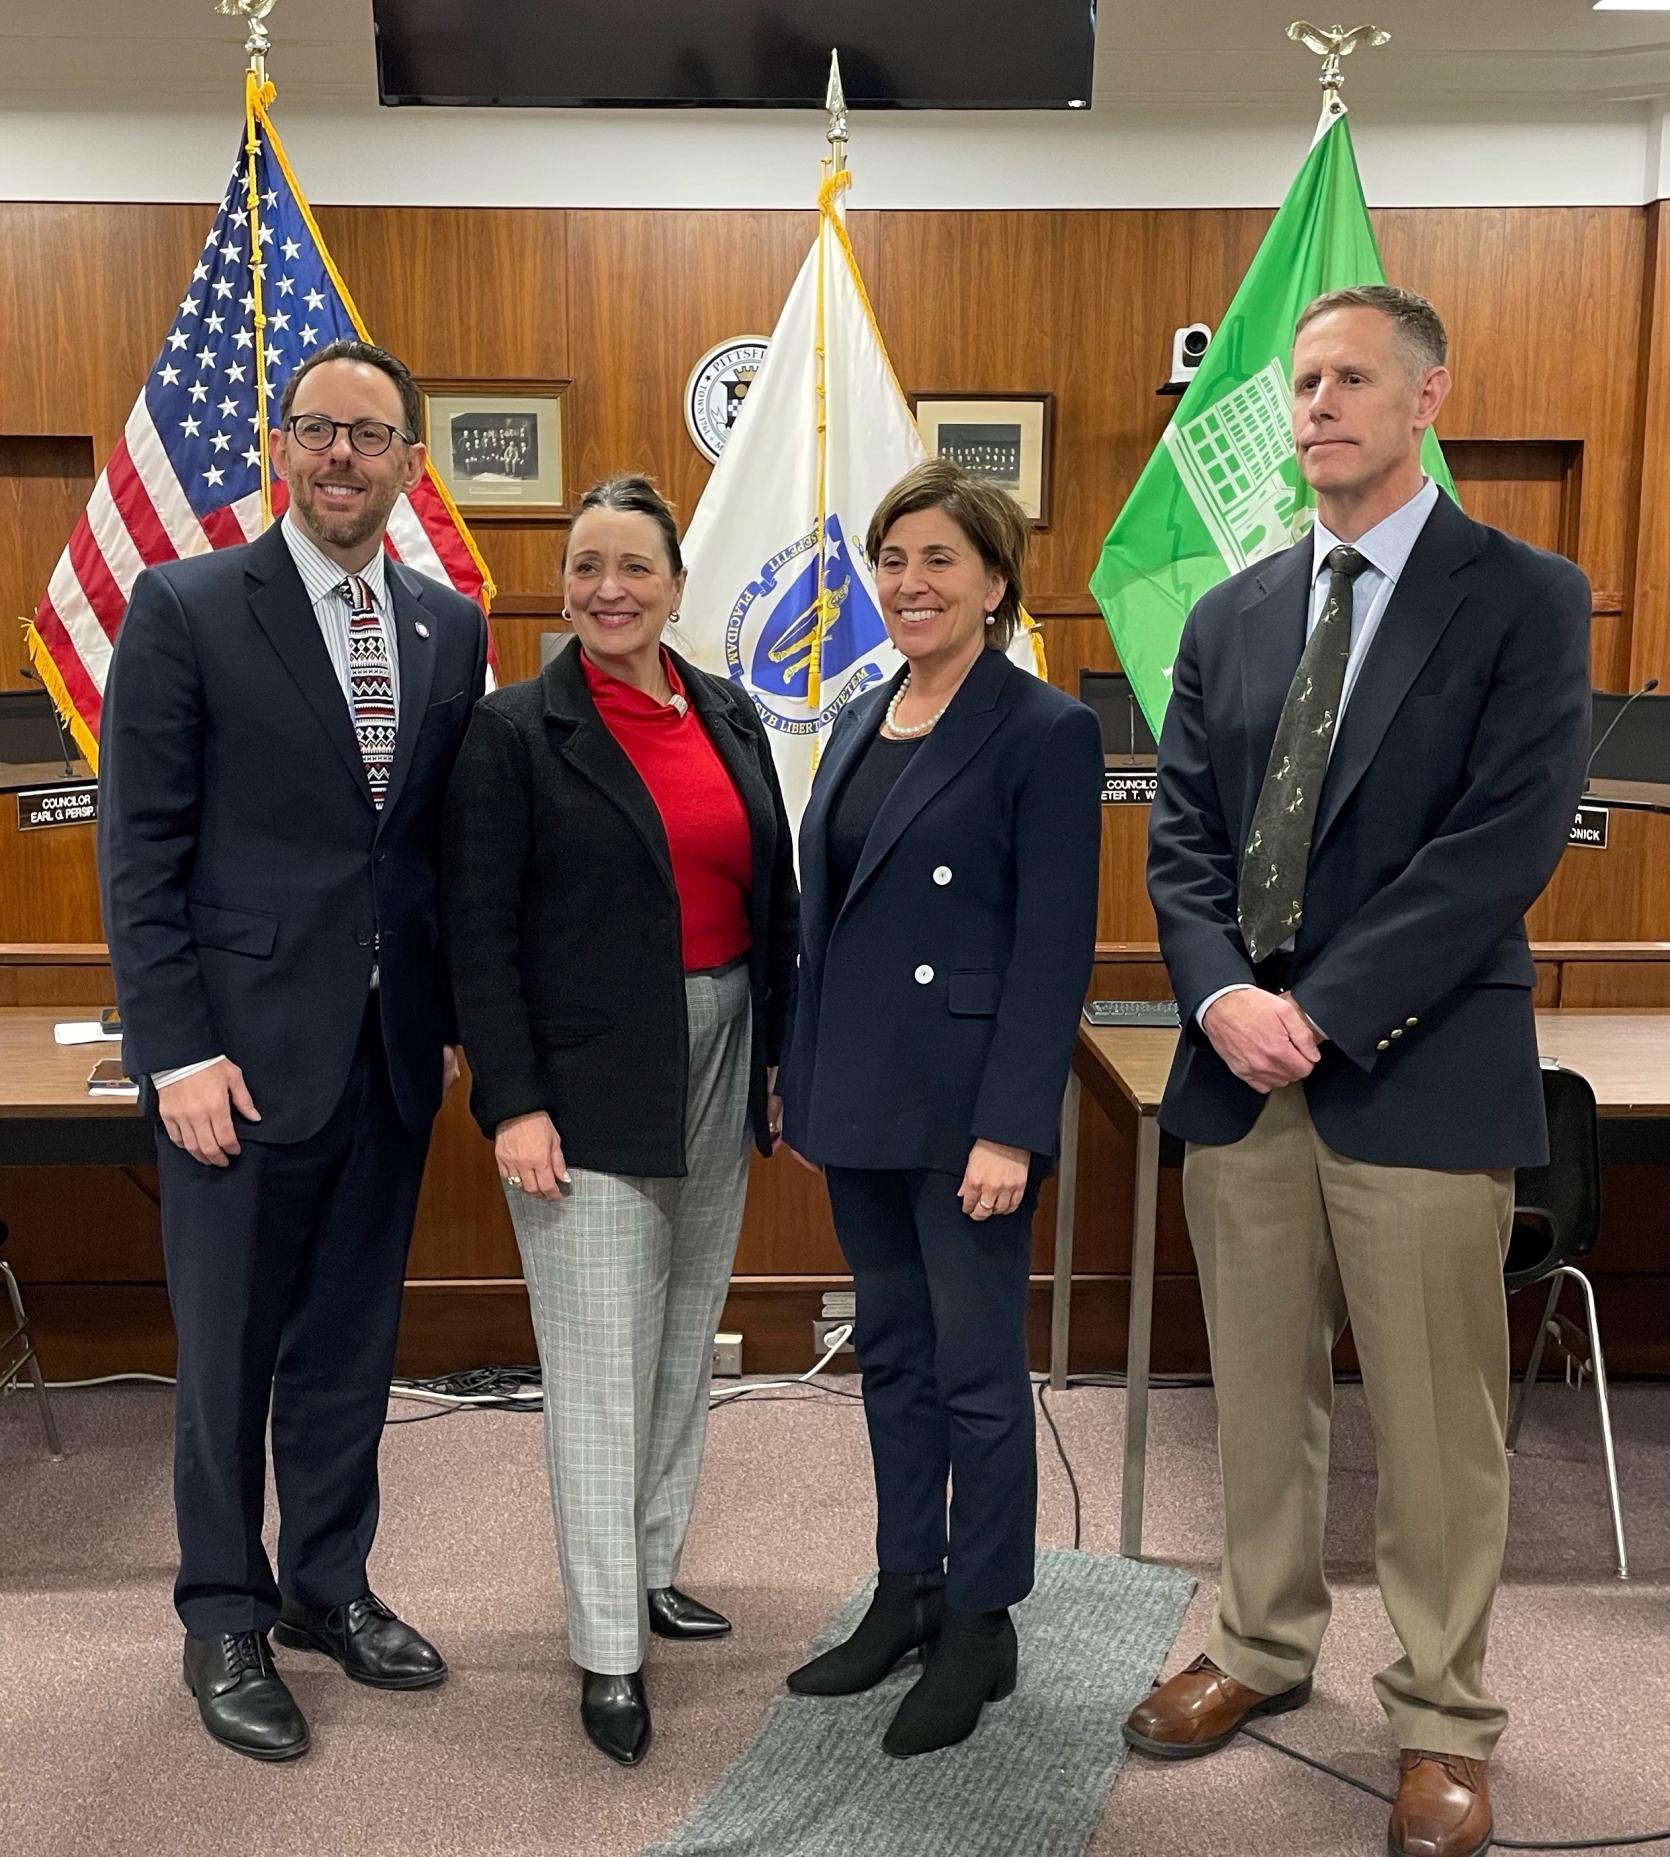 Today, the Healey-Driscoll Administration announced a significant investment in addressing aging dams. From left to right: DCR Commissioner Brian Arrigo, Pittsfield Mayor Linda M. Tyer, EEA Secretary Rebecca Tepper, and DFG Commissioner Tom O’Shea.